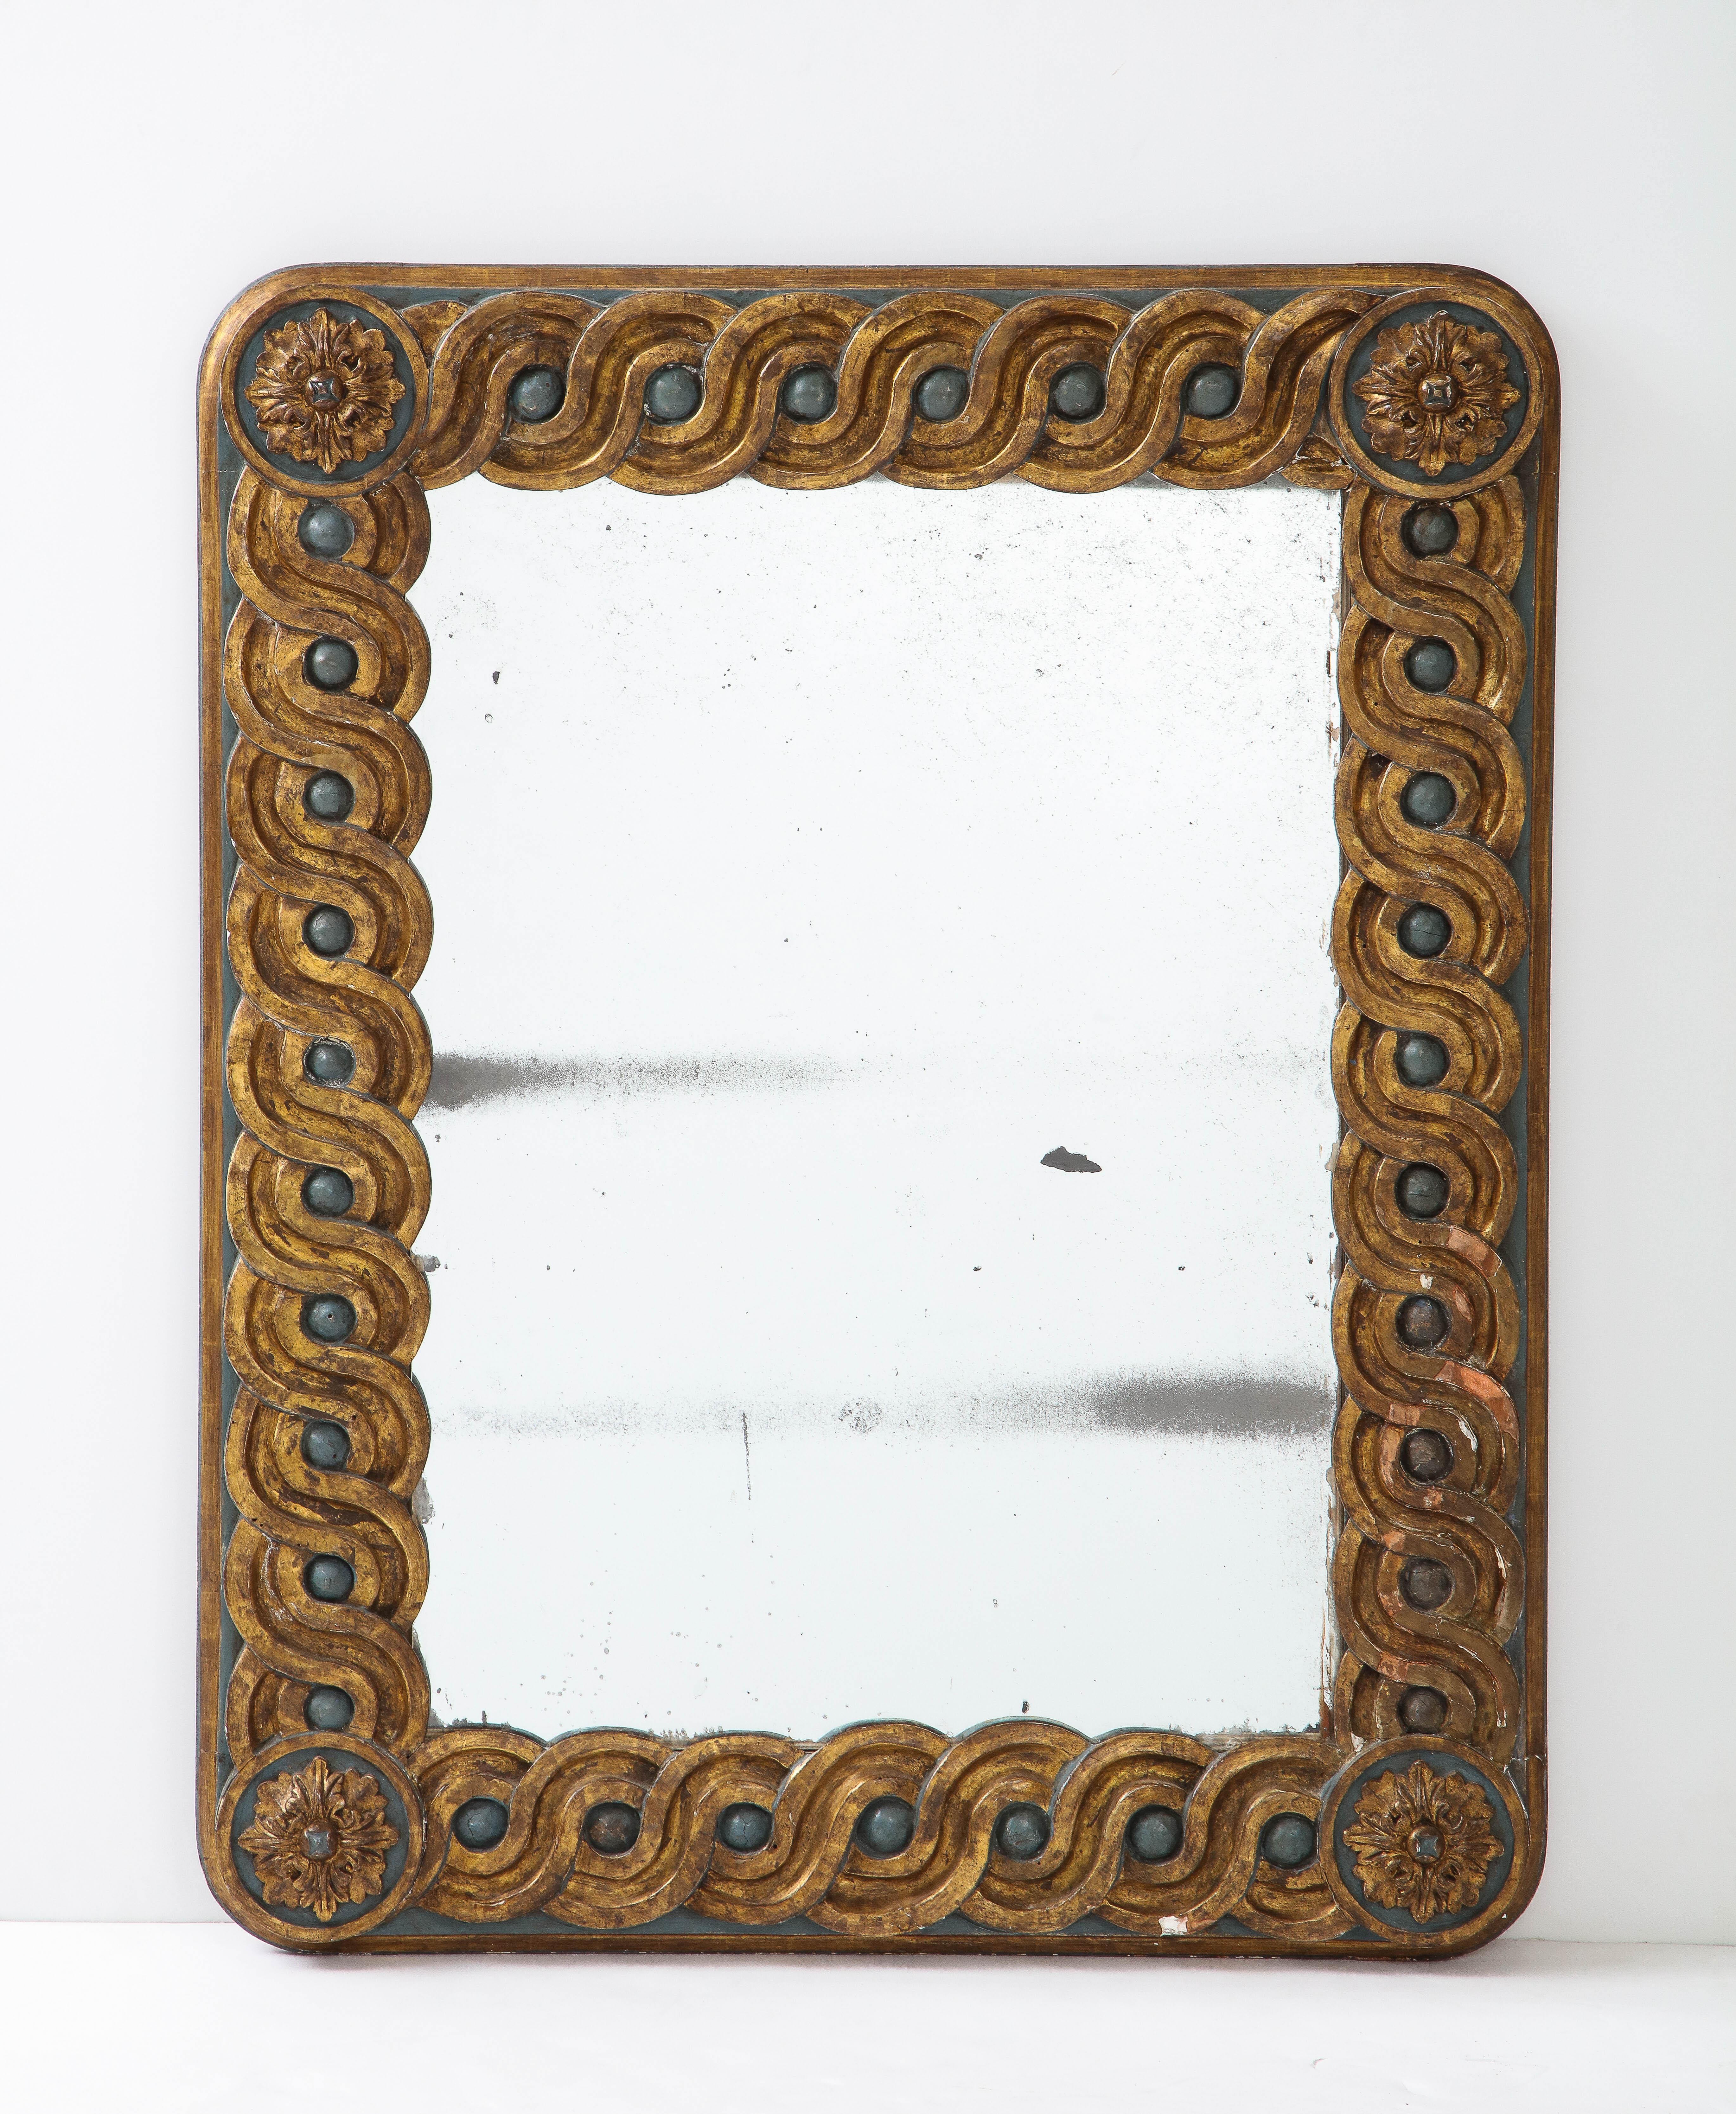 An Italian carved and painted gilded wood mirror, the whole with guilloche gilded carving and large painted bead motif within. The background of the frame is painted in a beautiful blue/green or teal, the frame with rounded corners, each decorated